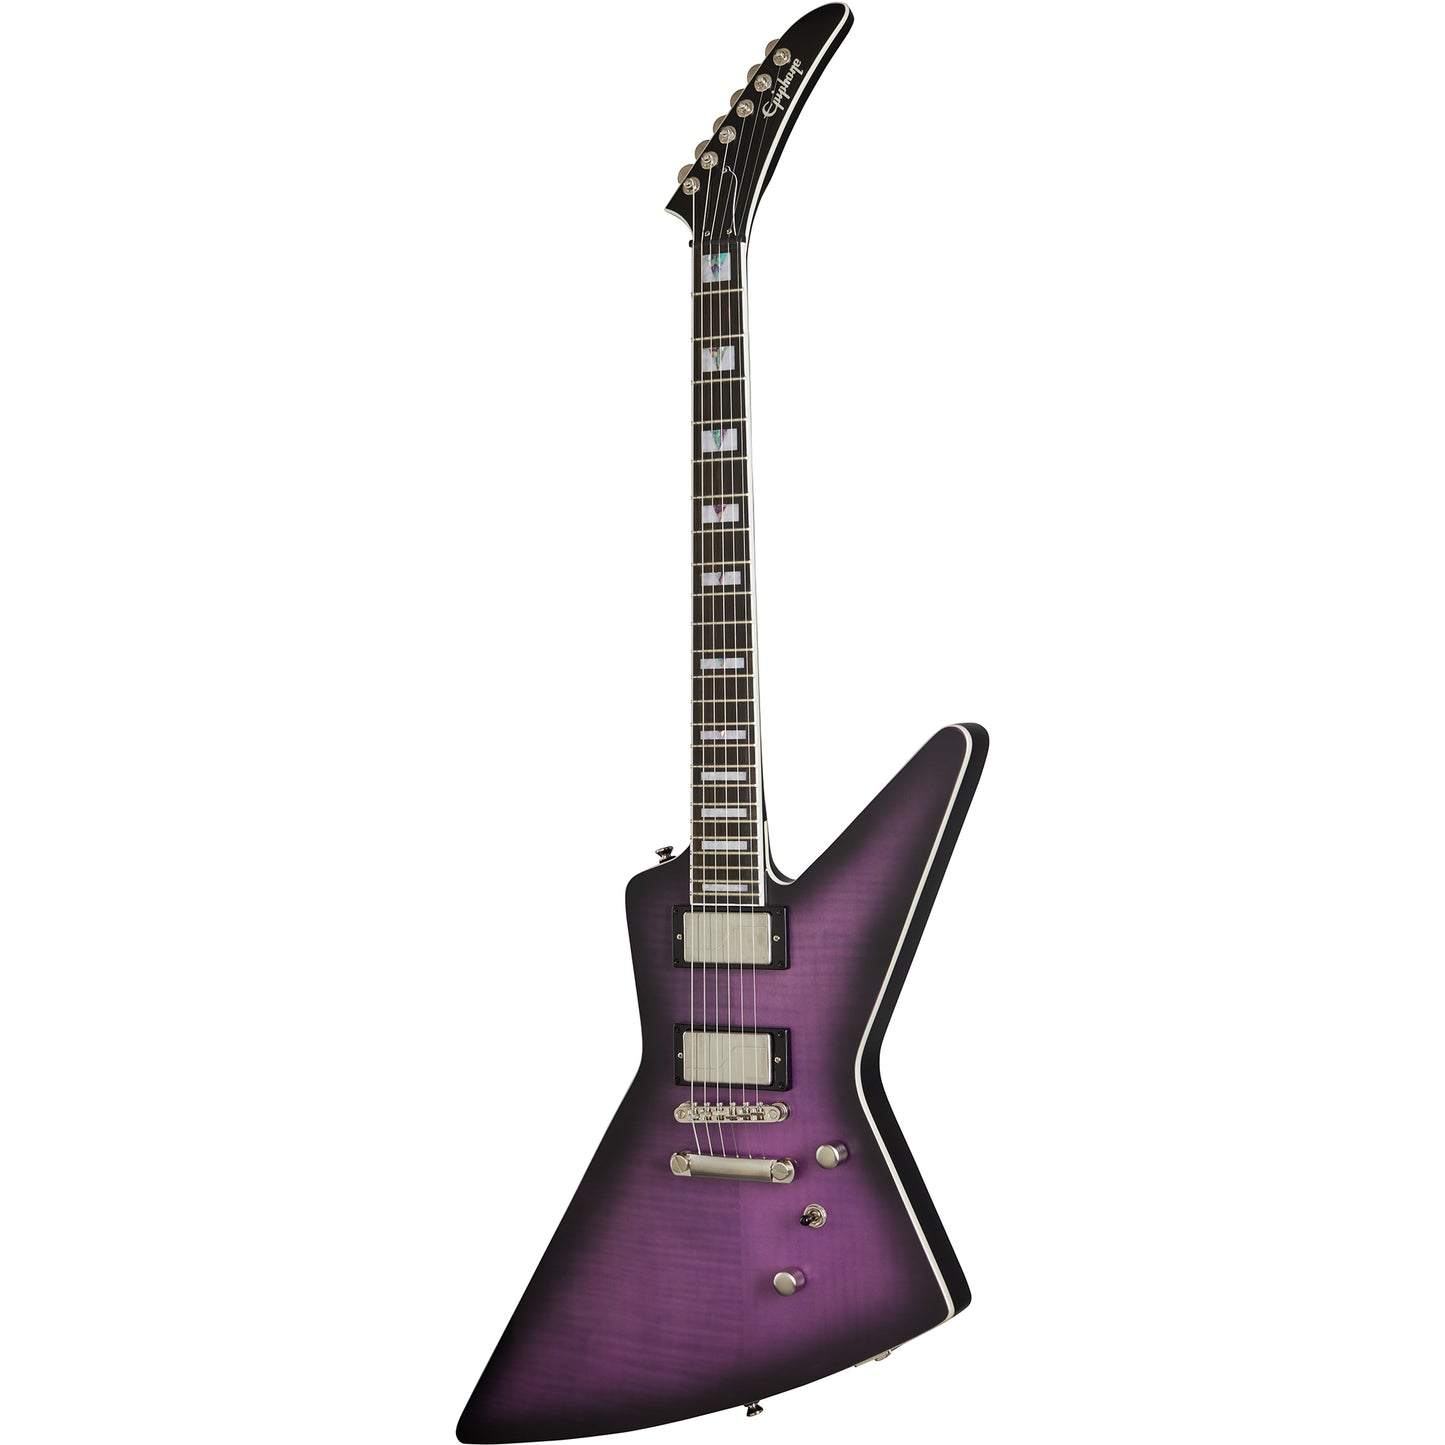 Epiphone Extura Prophecy Electric Guitar in Purple Tiger Aged Gloss